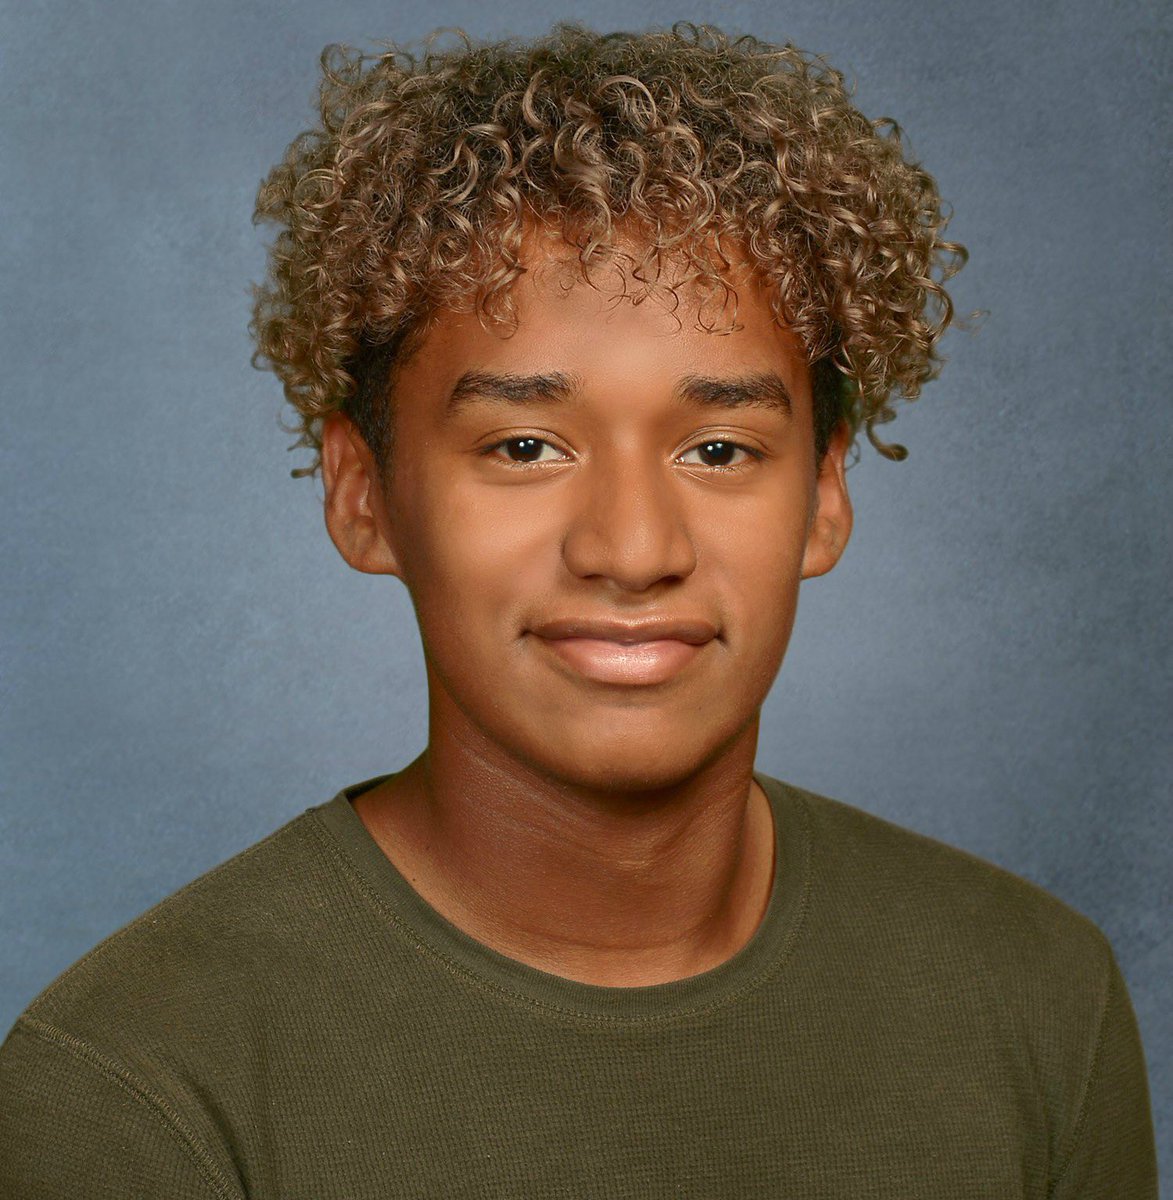 𝐀𝐥𝐞𝐣𝐚𝐧𝐝𝐫𝗼 𝐕𝐚𝐫𝐠𝐚𝐬 𝐌𝐚𝐫𝐭𝐢𝐧𝐞𝐳killed while walking to school. he died by gunshot wound. he was last talking to his mom about helping her pay the bills and was described as a loving boy.